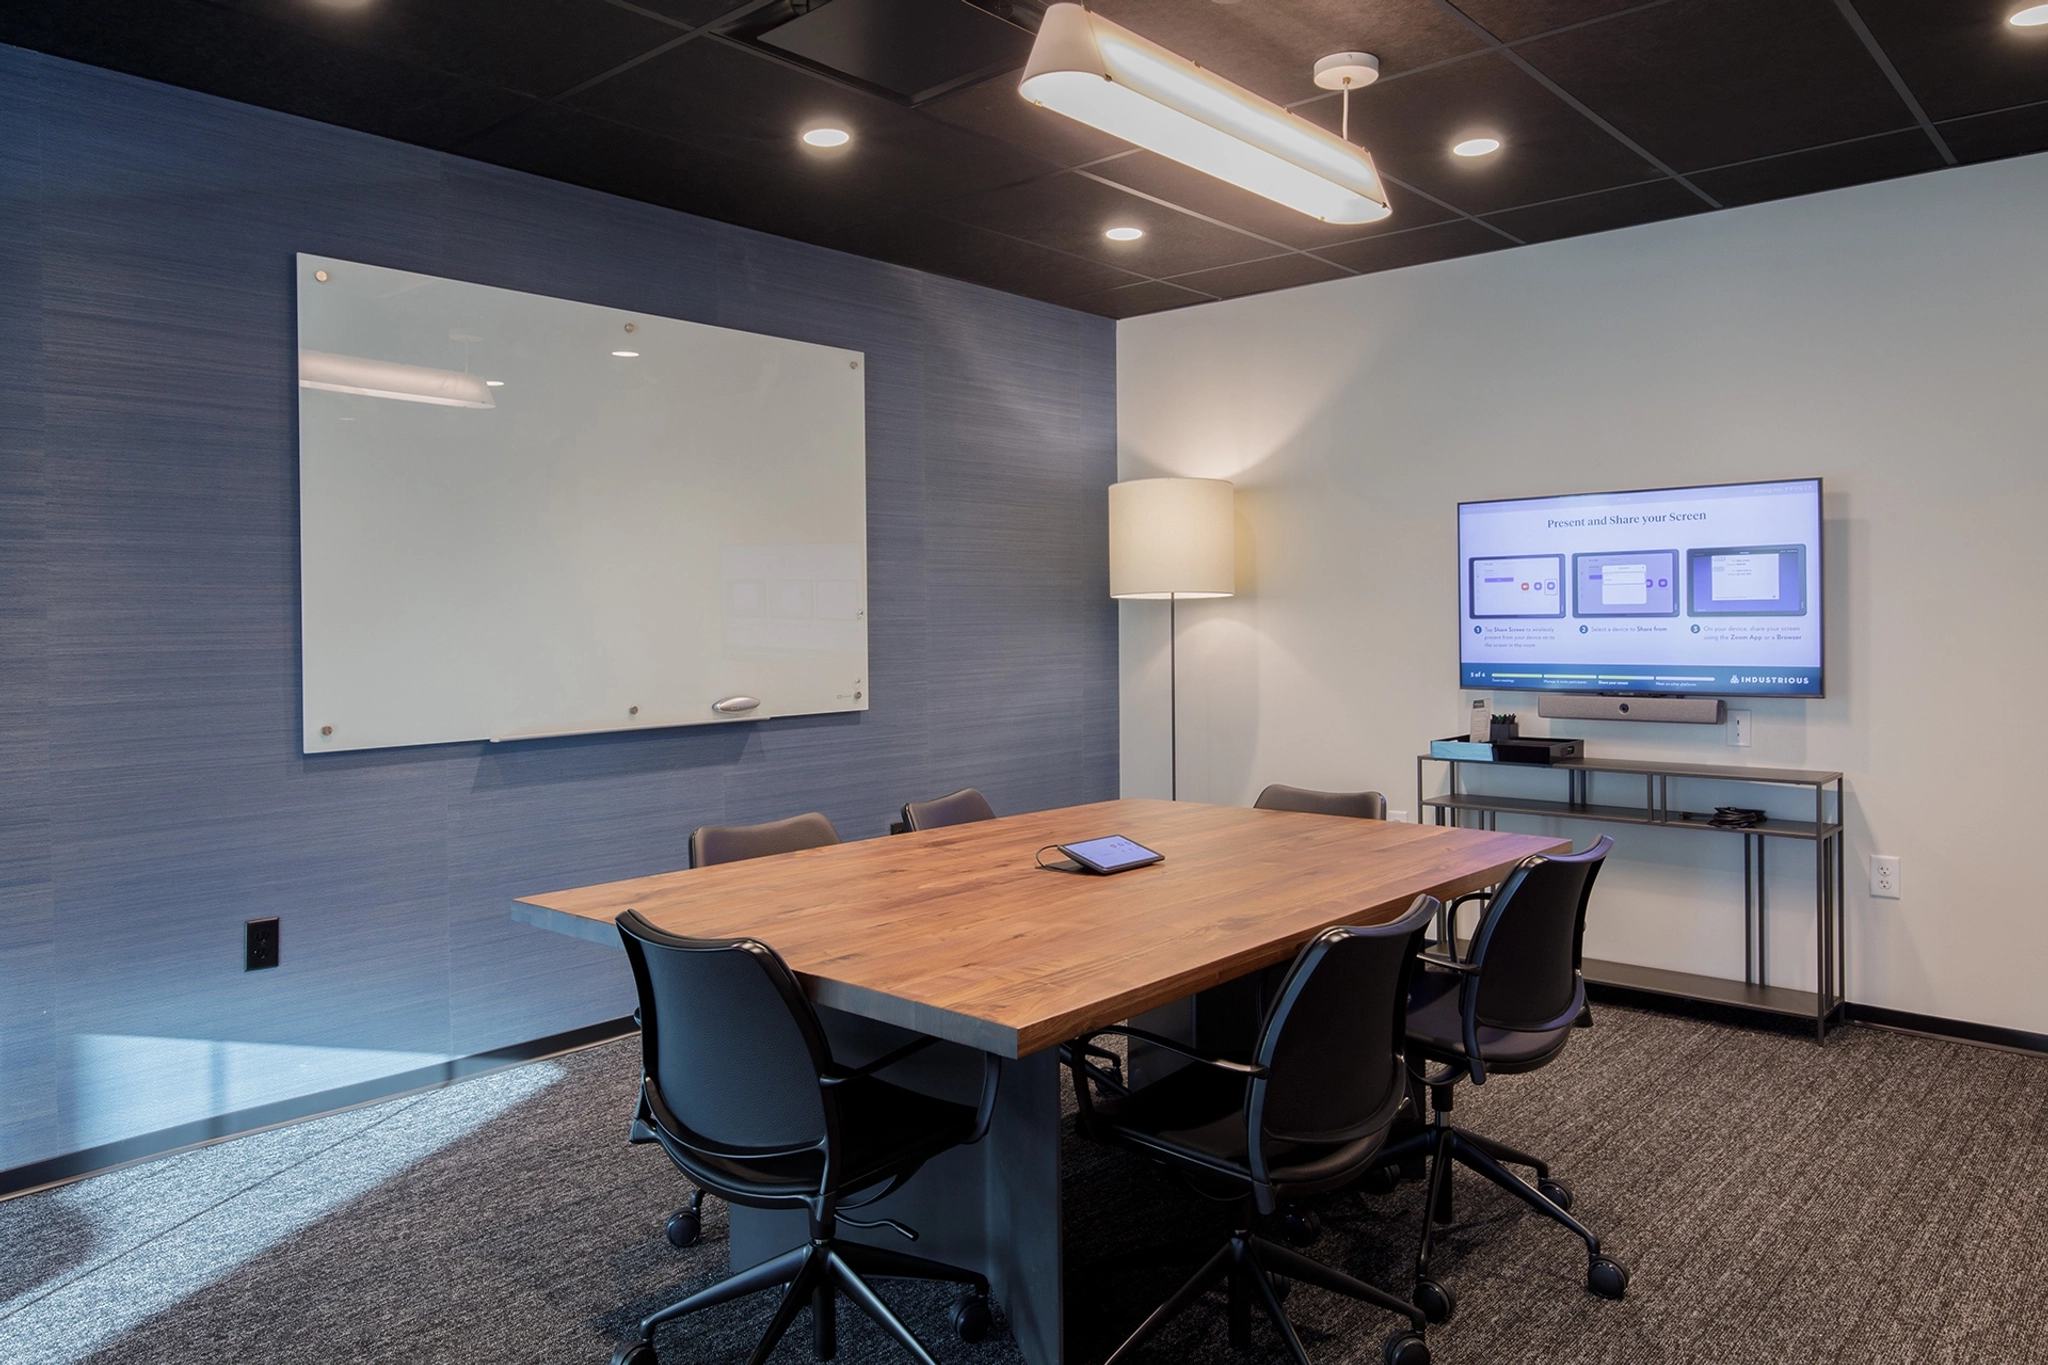 A modern conference room in Fort Lauderdale featuring a large wooden table, six chairs, a whiteboard, a mounted screen displaying a presentation, and a floor lamp provides an ideal workspace.